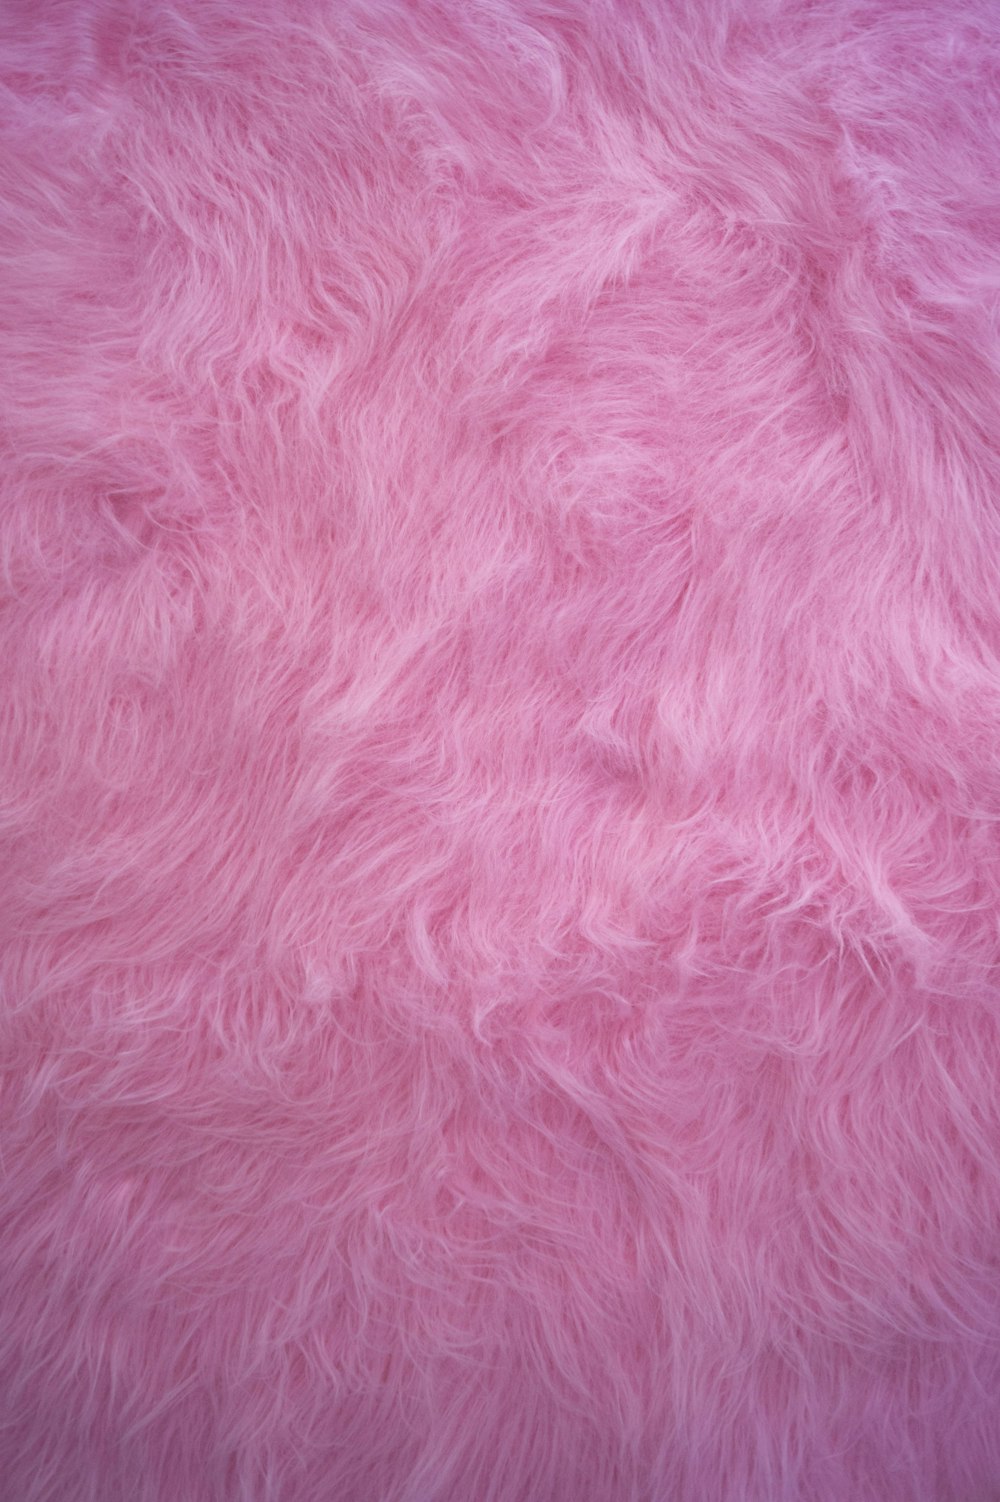 1K+ Texture Pink Pictures | Download Free Images on Unsplash